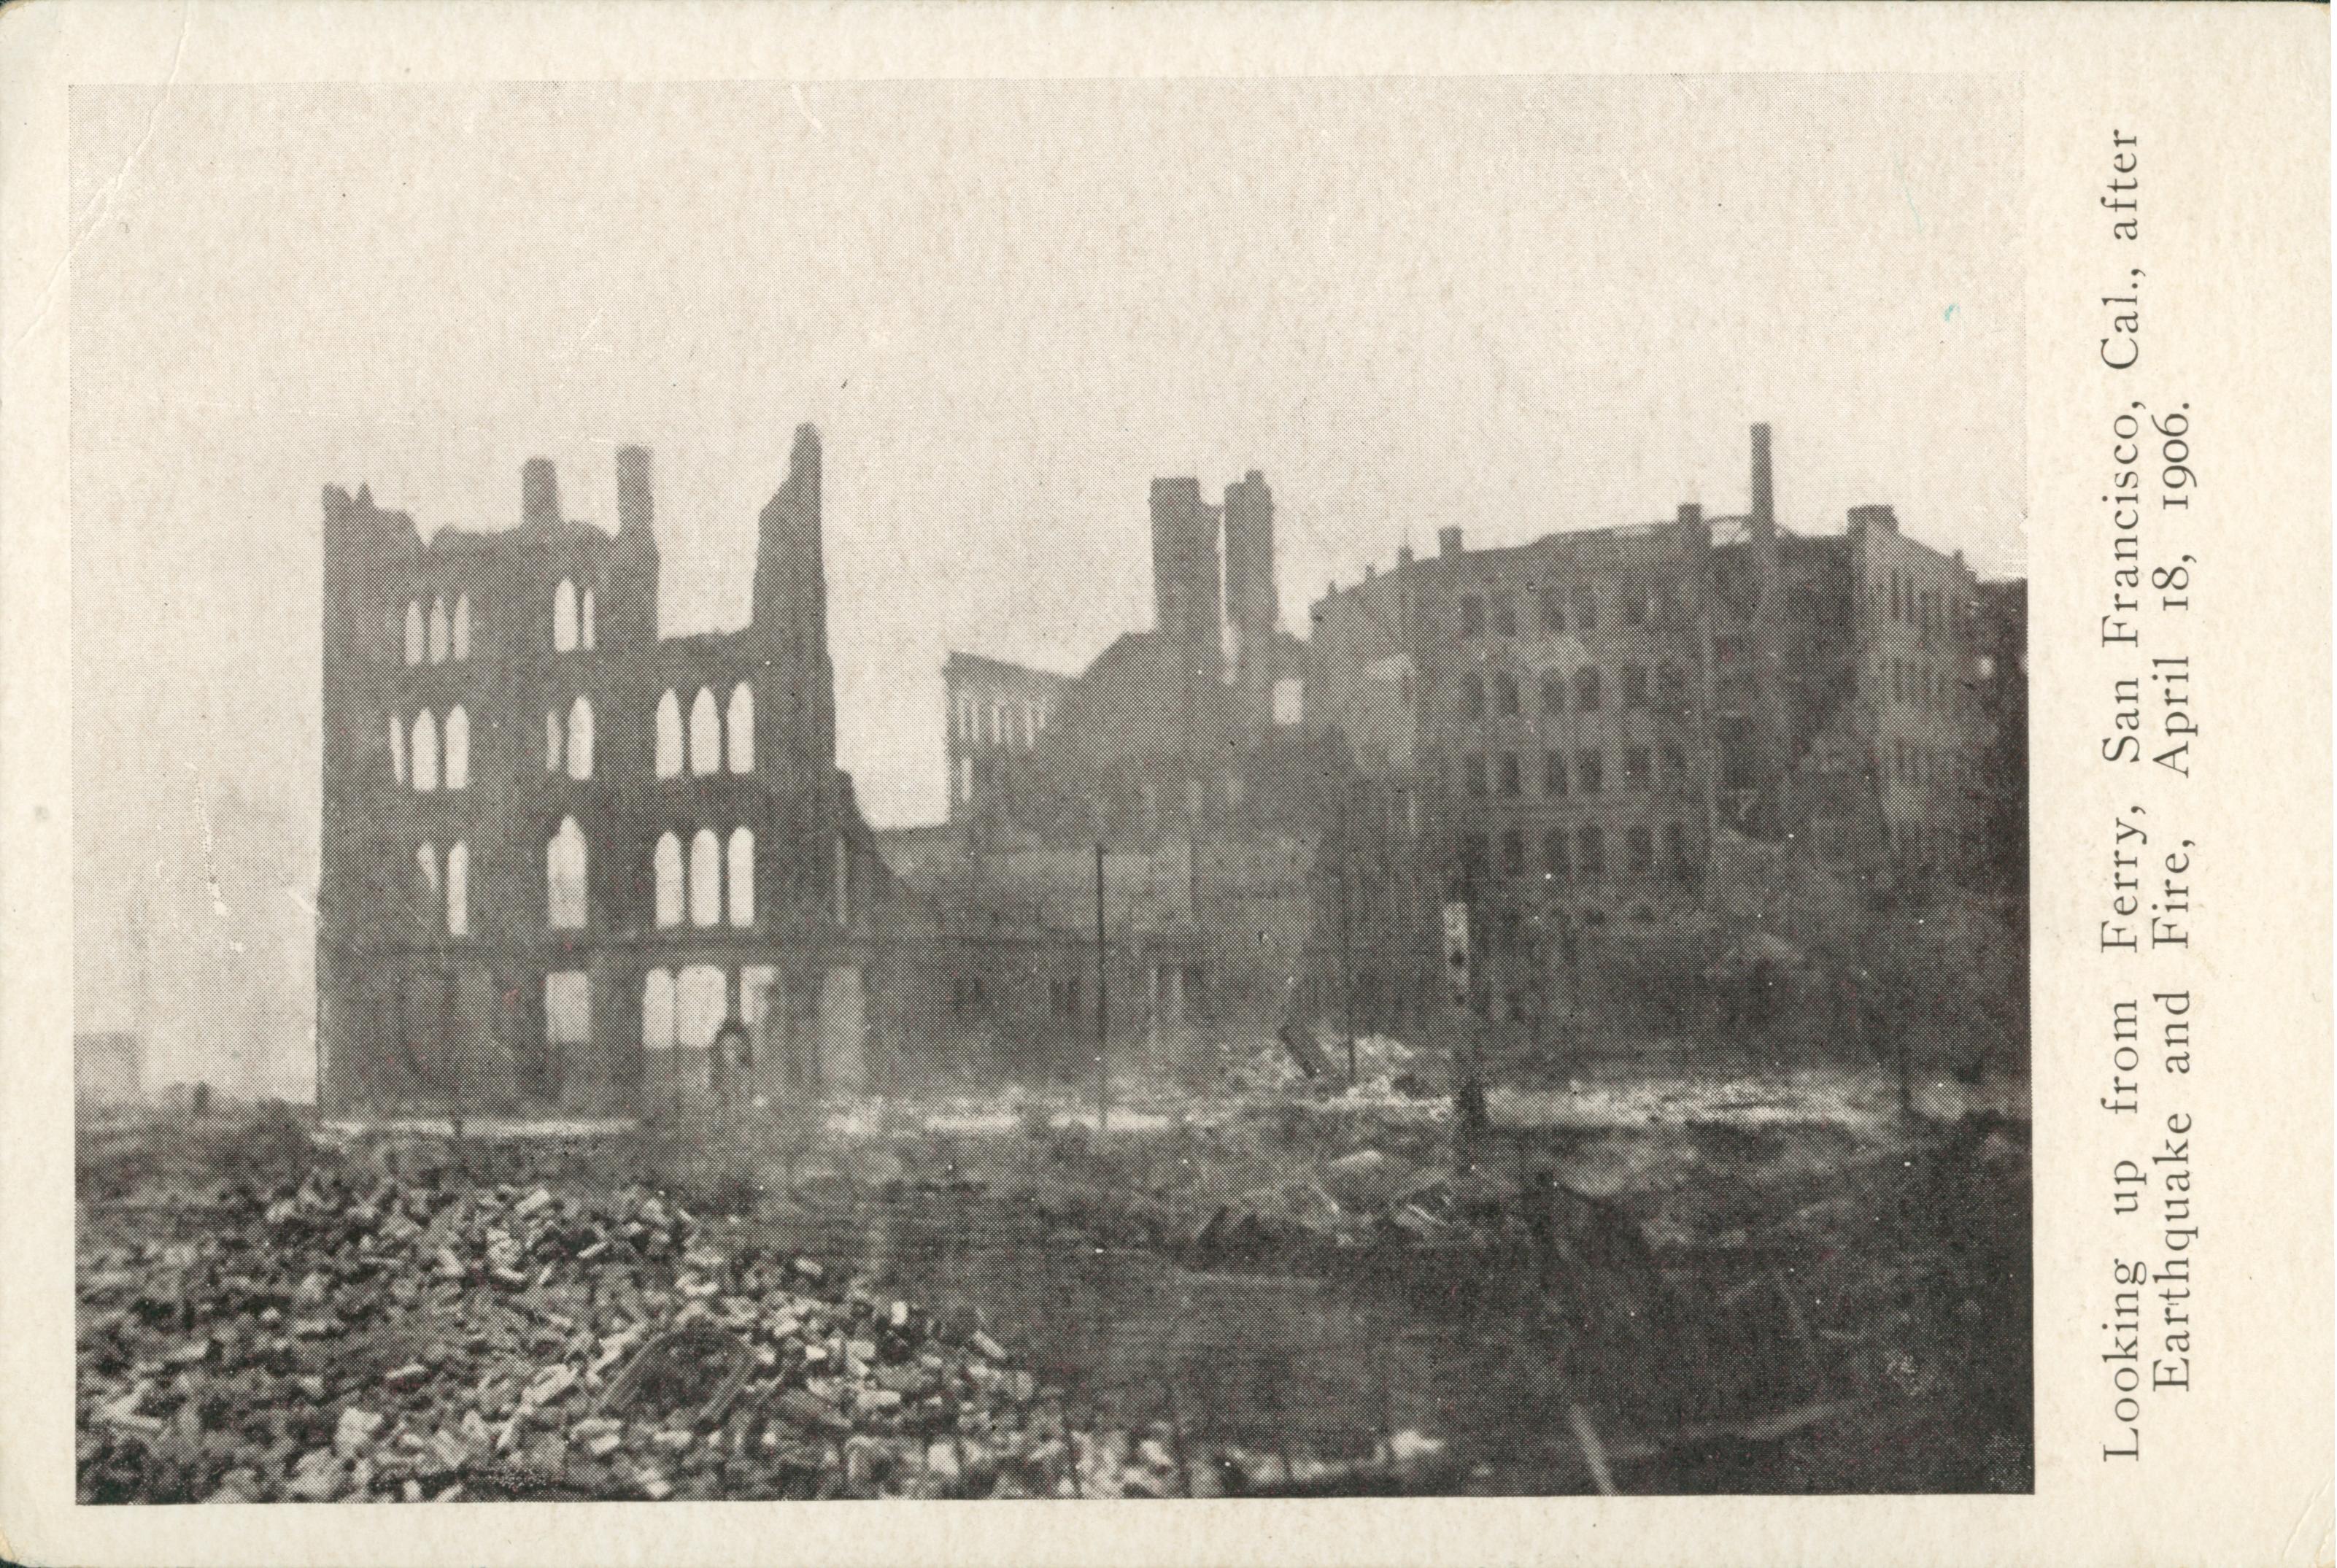 Shows several destroyed buildings surrounded by rubble.